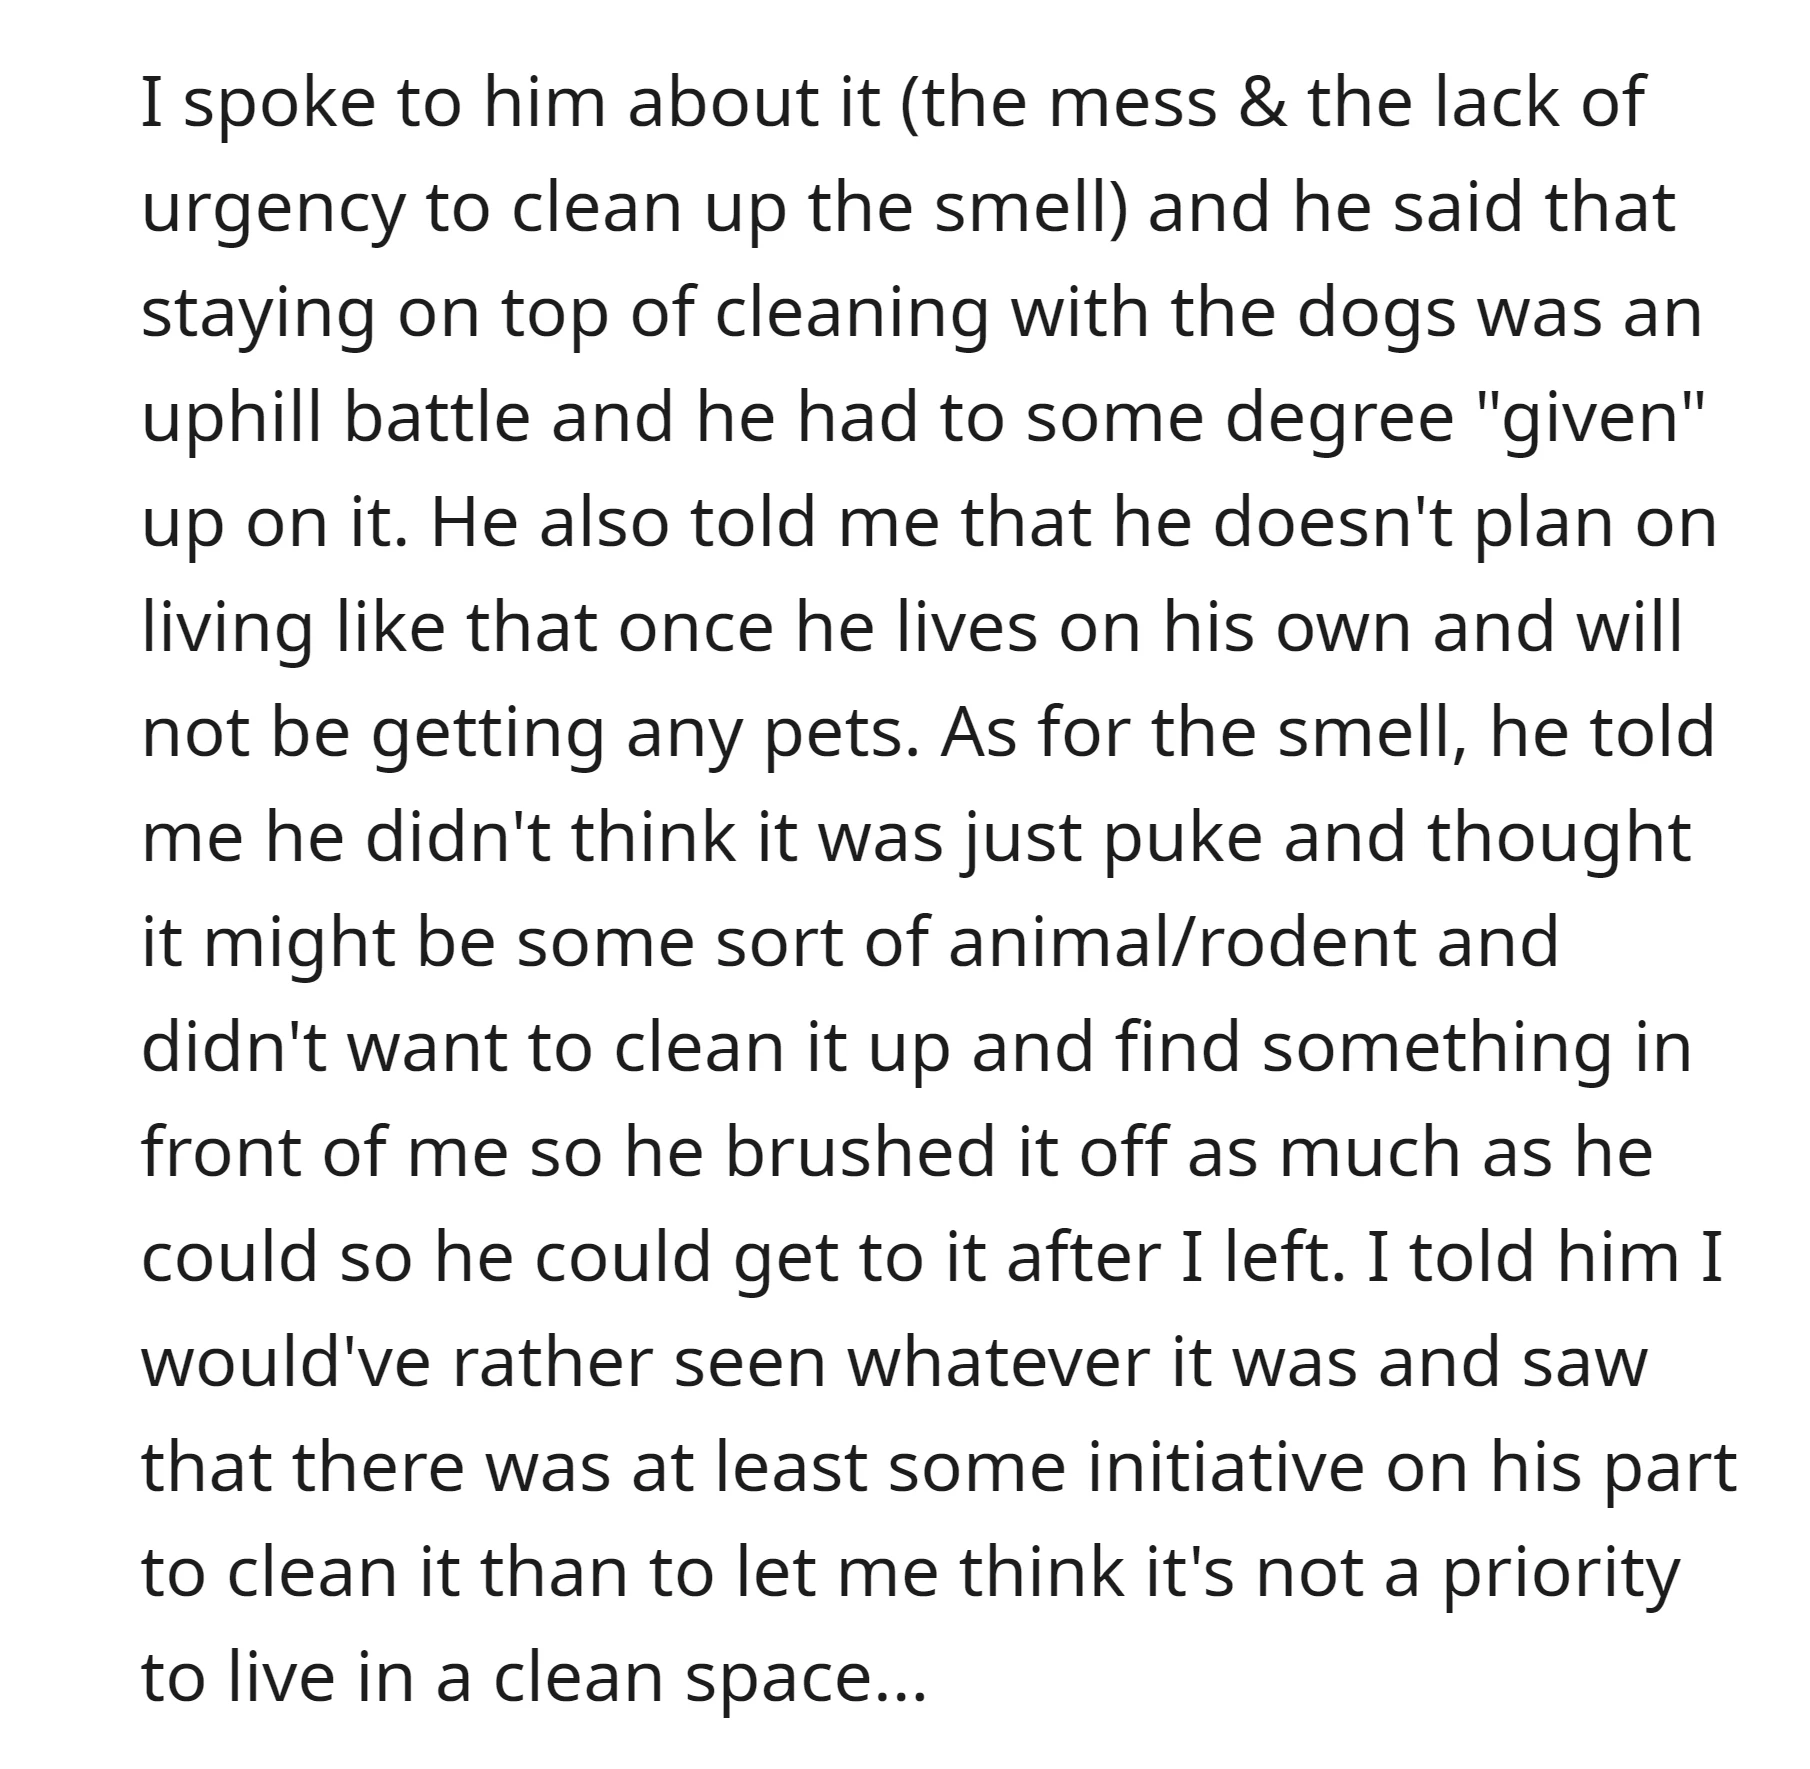 The guy said to the OP that in the future there would be no pets